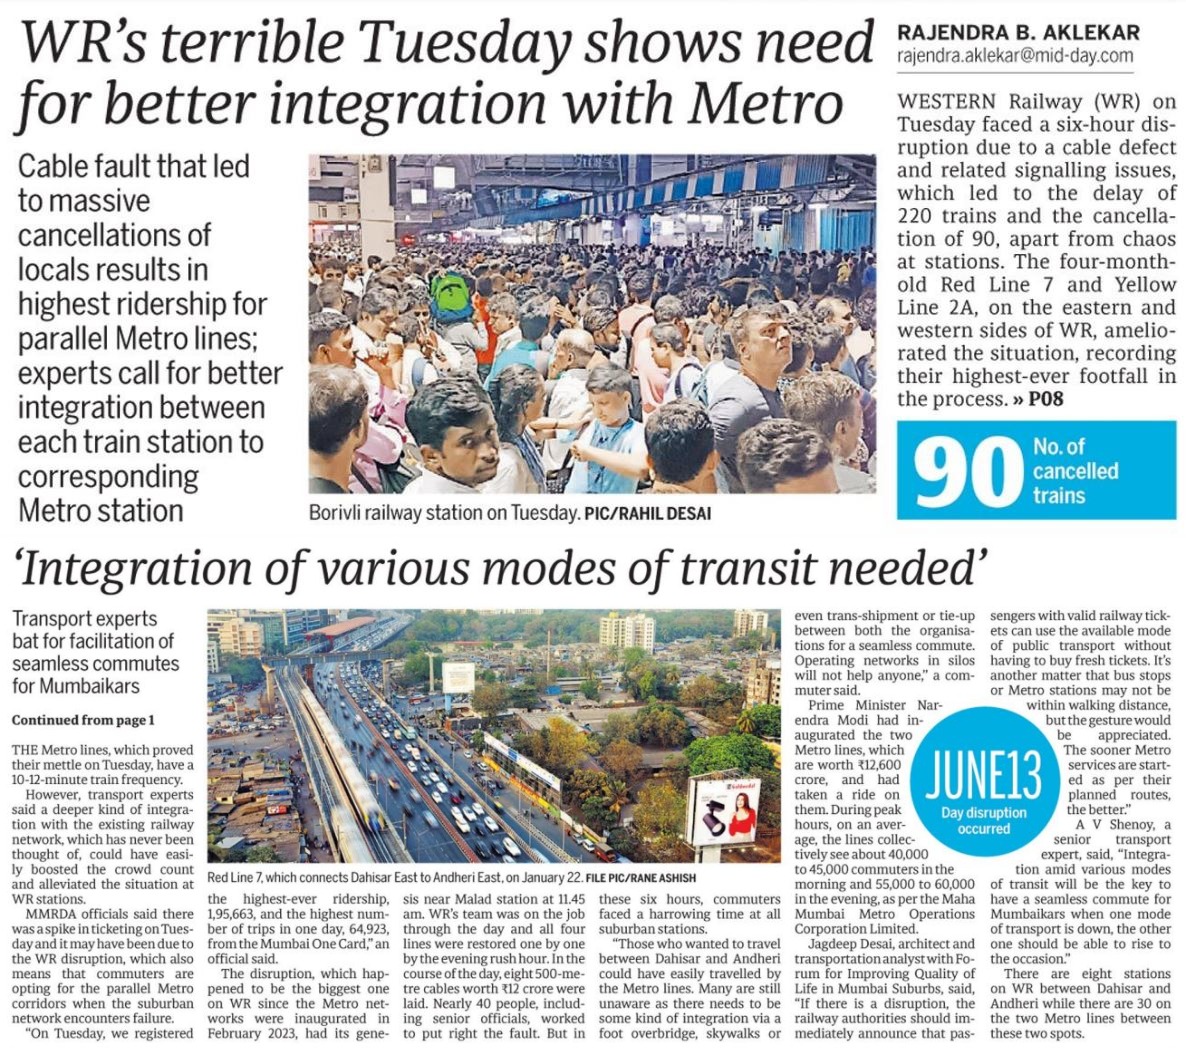 With highest footfall on Western Railway disruption day, Mumbai’s new Metro lines prove themselves! 

The new four-month-old Mumbai Metro rail corridors of Red Line 7 and Yellow Line 2A that operate parallel trains on either side of the WR in east and in west at a frequency of…